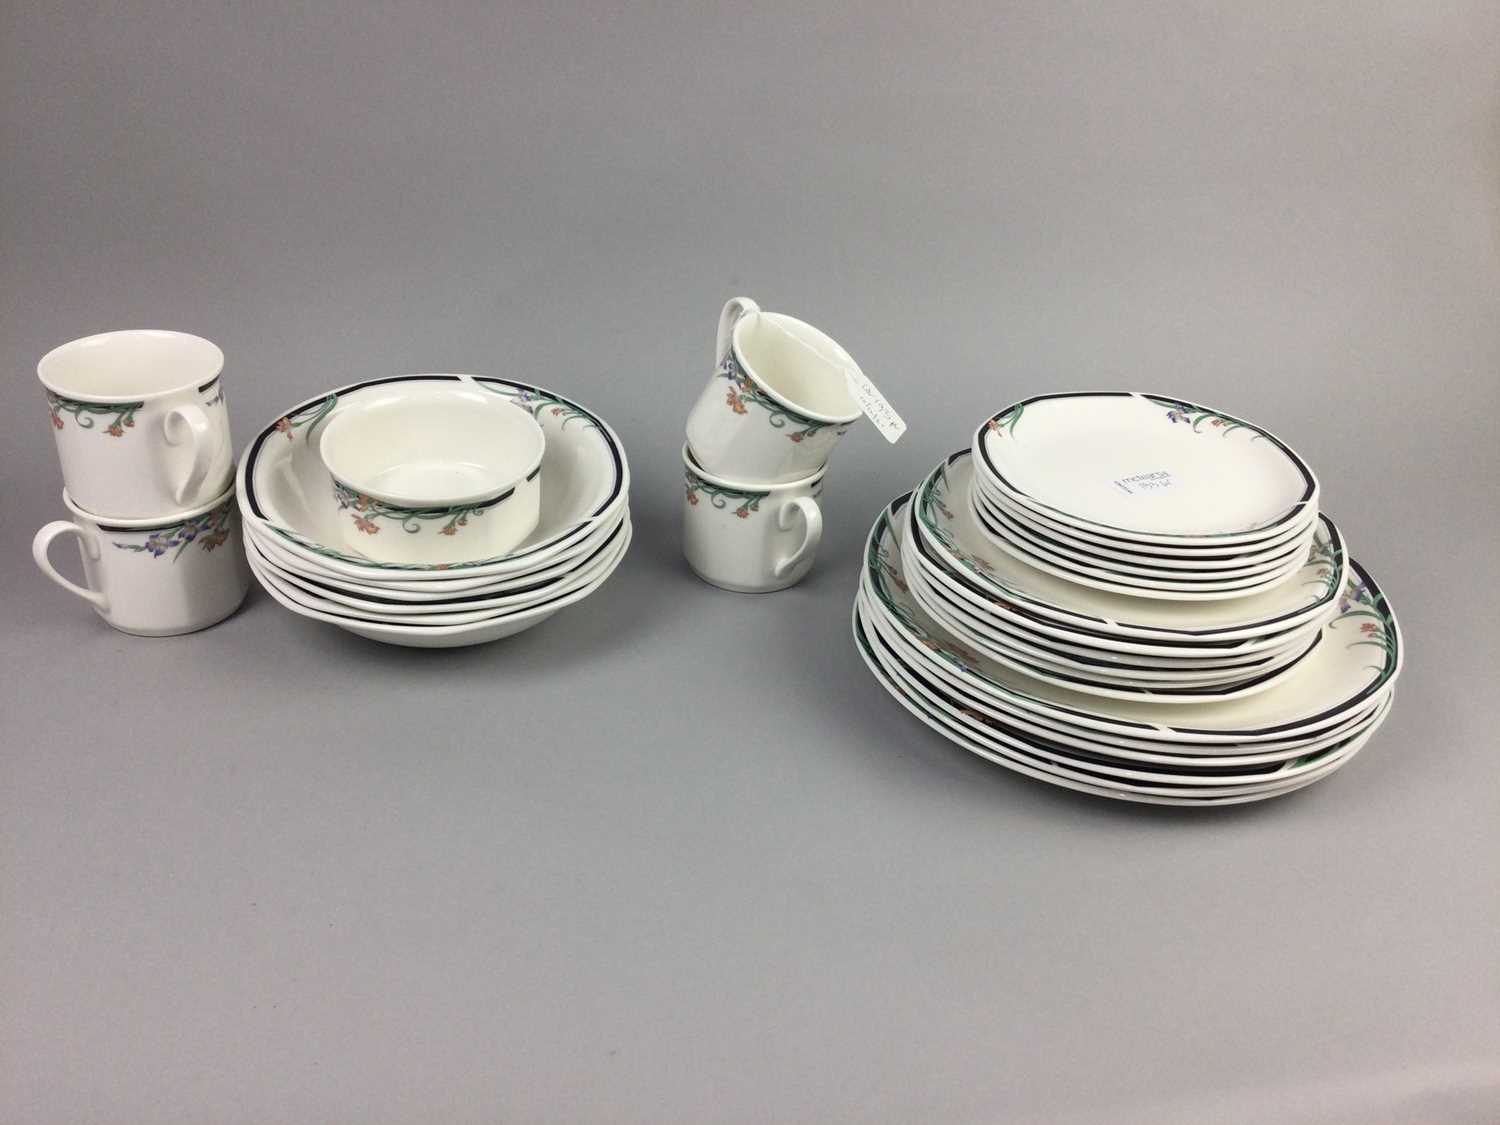 A ROYAL DOULTON 'JUNO' PATTERN DINNER SERVICE - Image 2 of 2